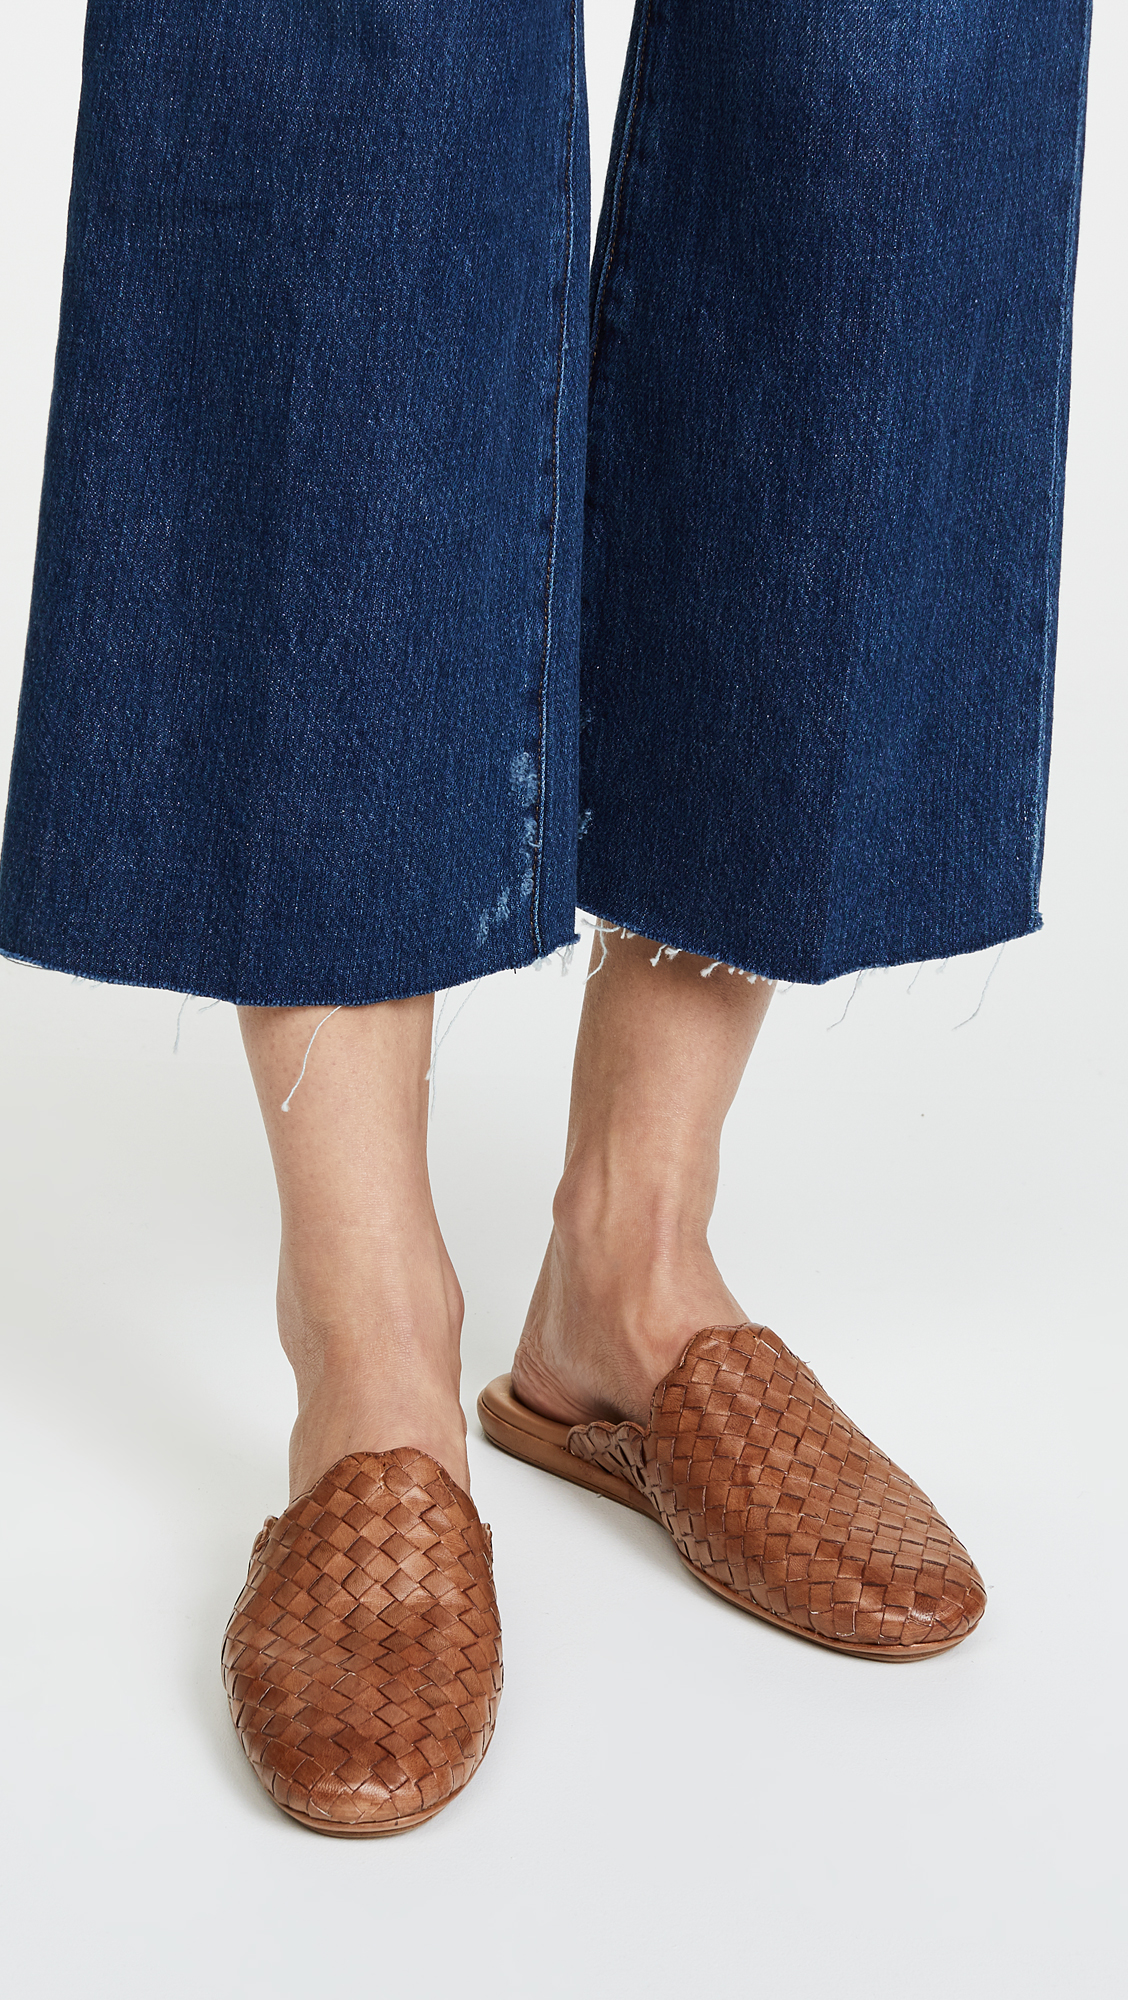 Sam Edelman Katy Mules - Weekly Finds featured by North Carolina style blogger, Glitter, Inc.